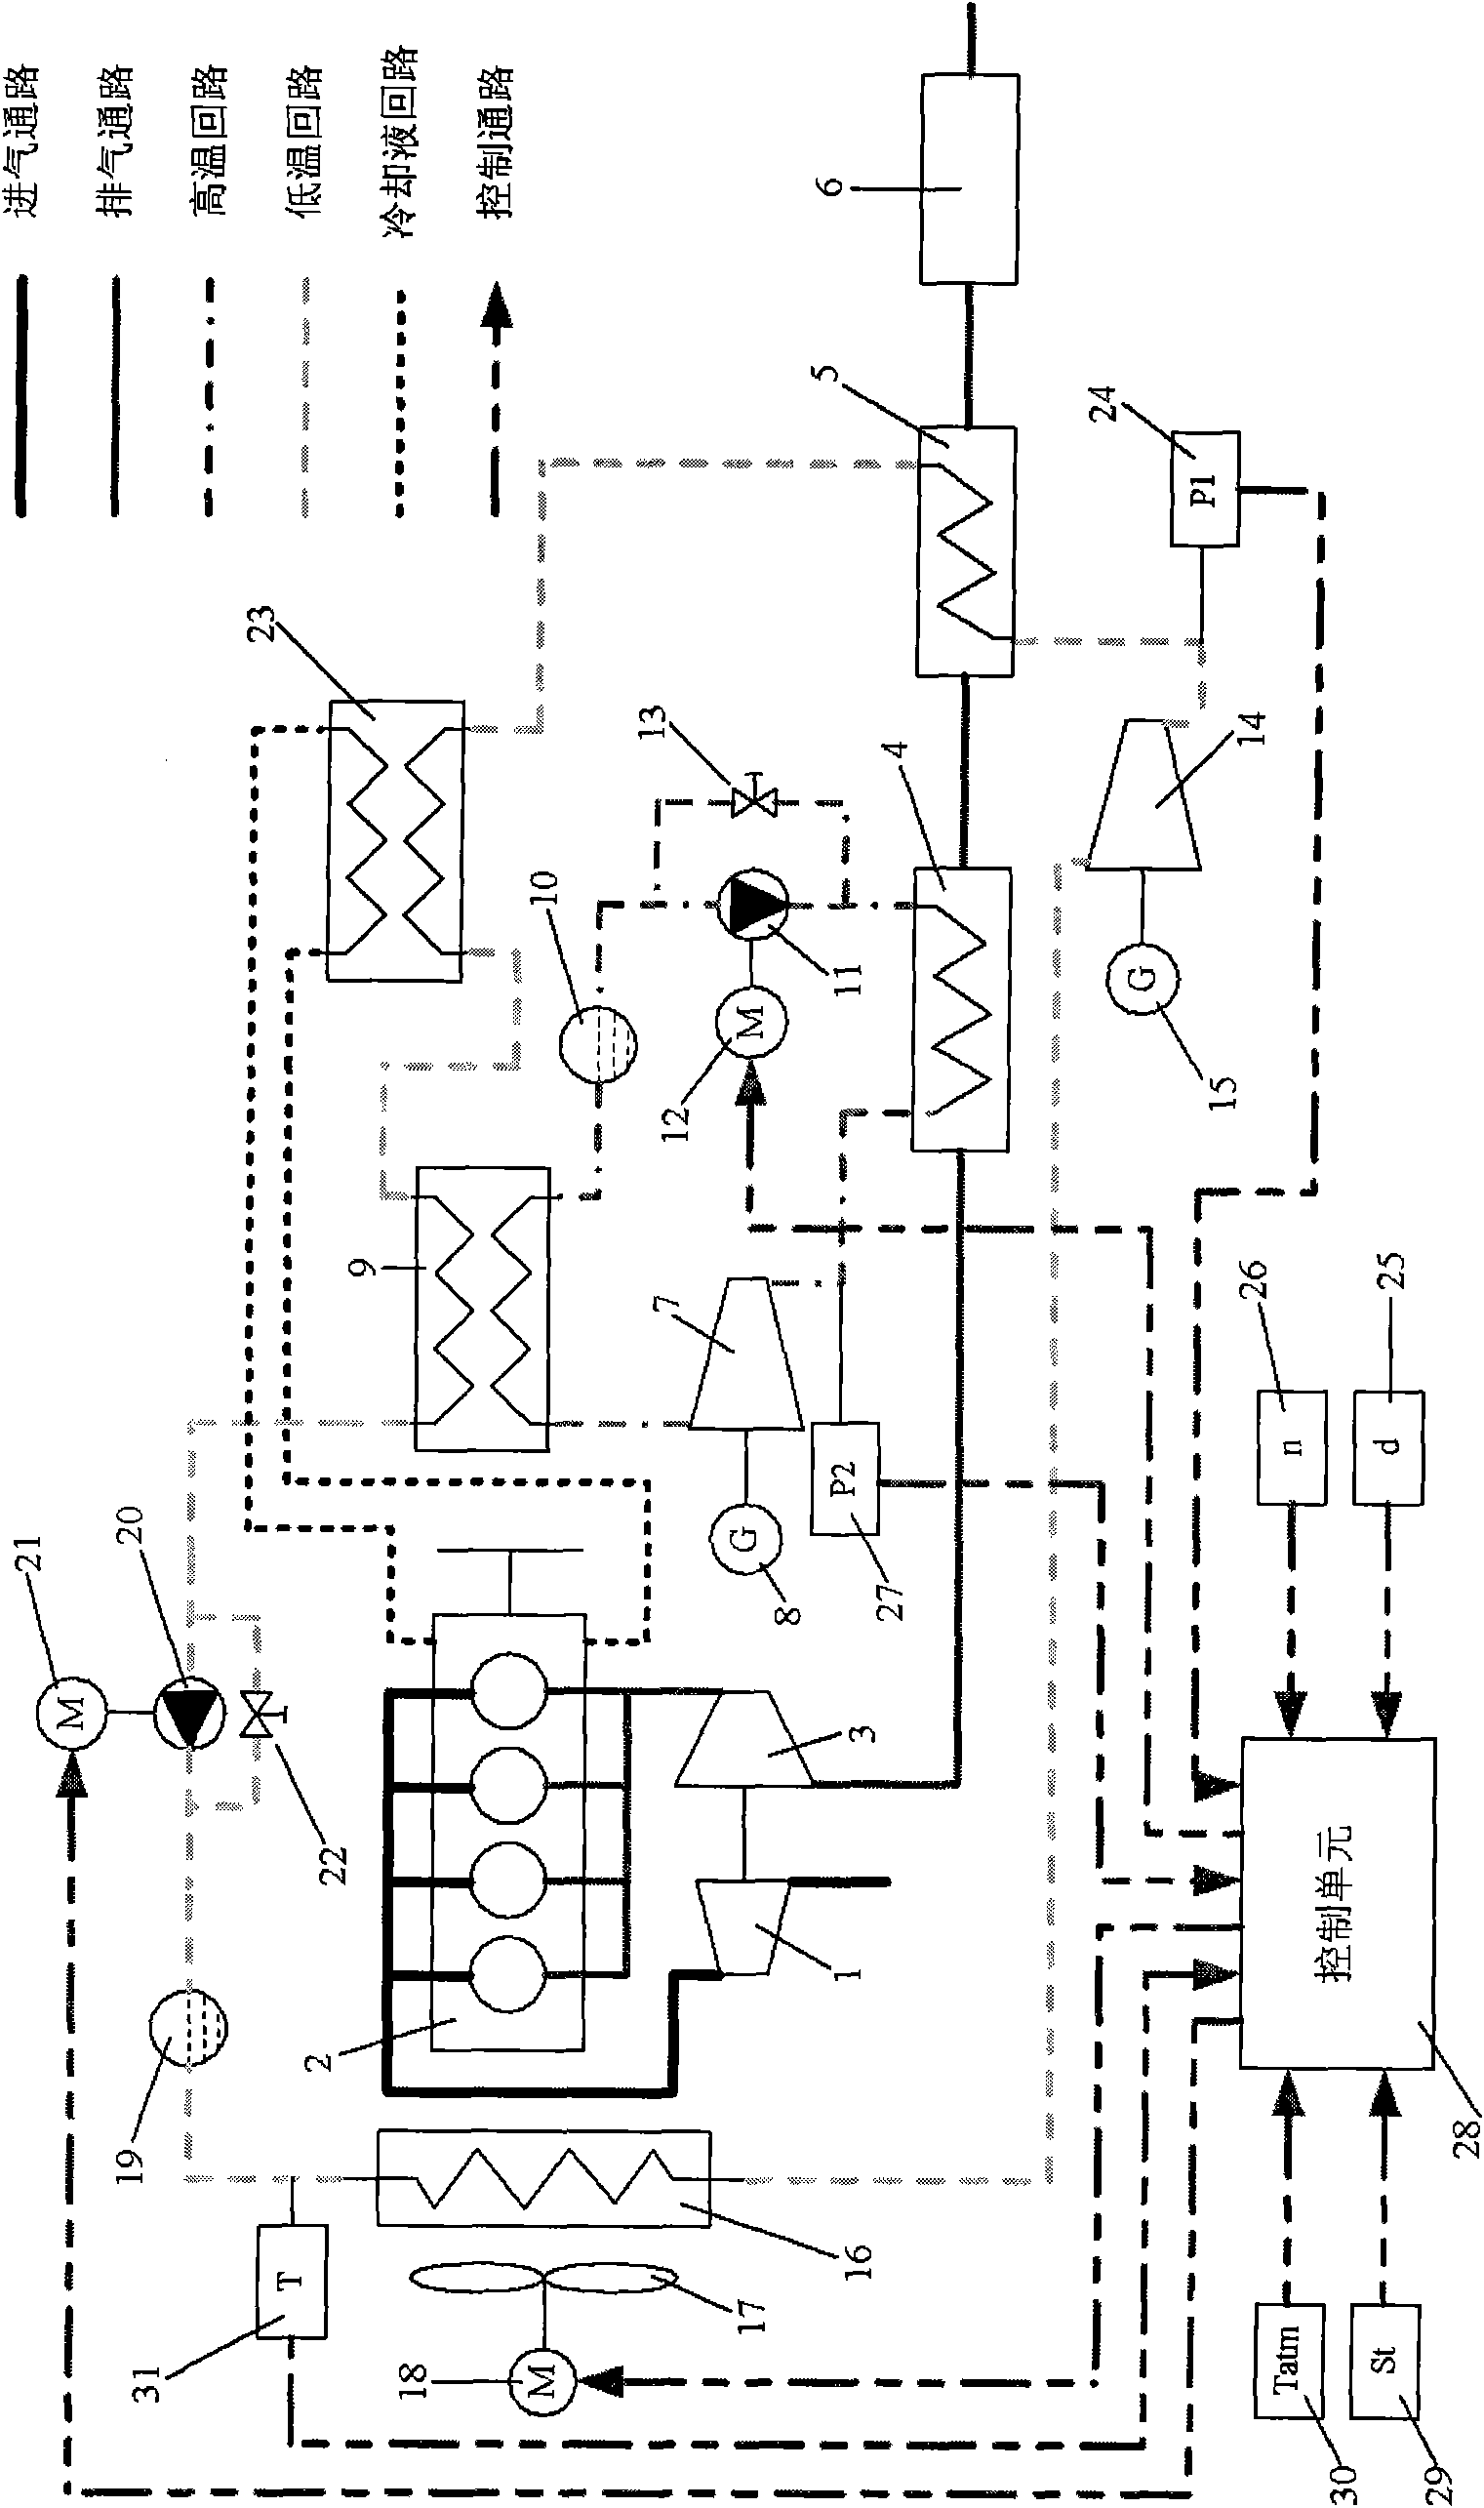 Control system and method for generating power by waste heat of diesel engine